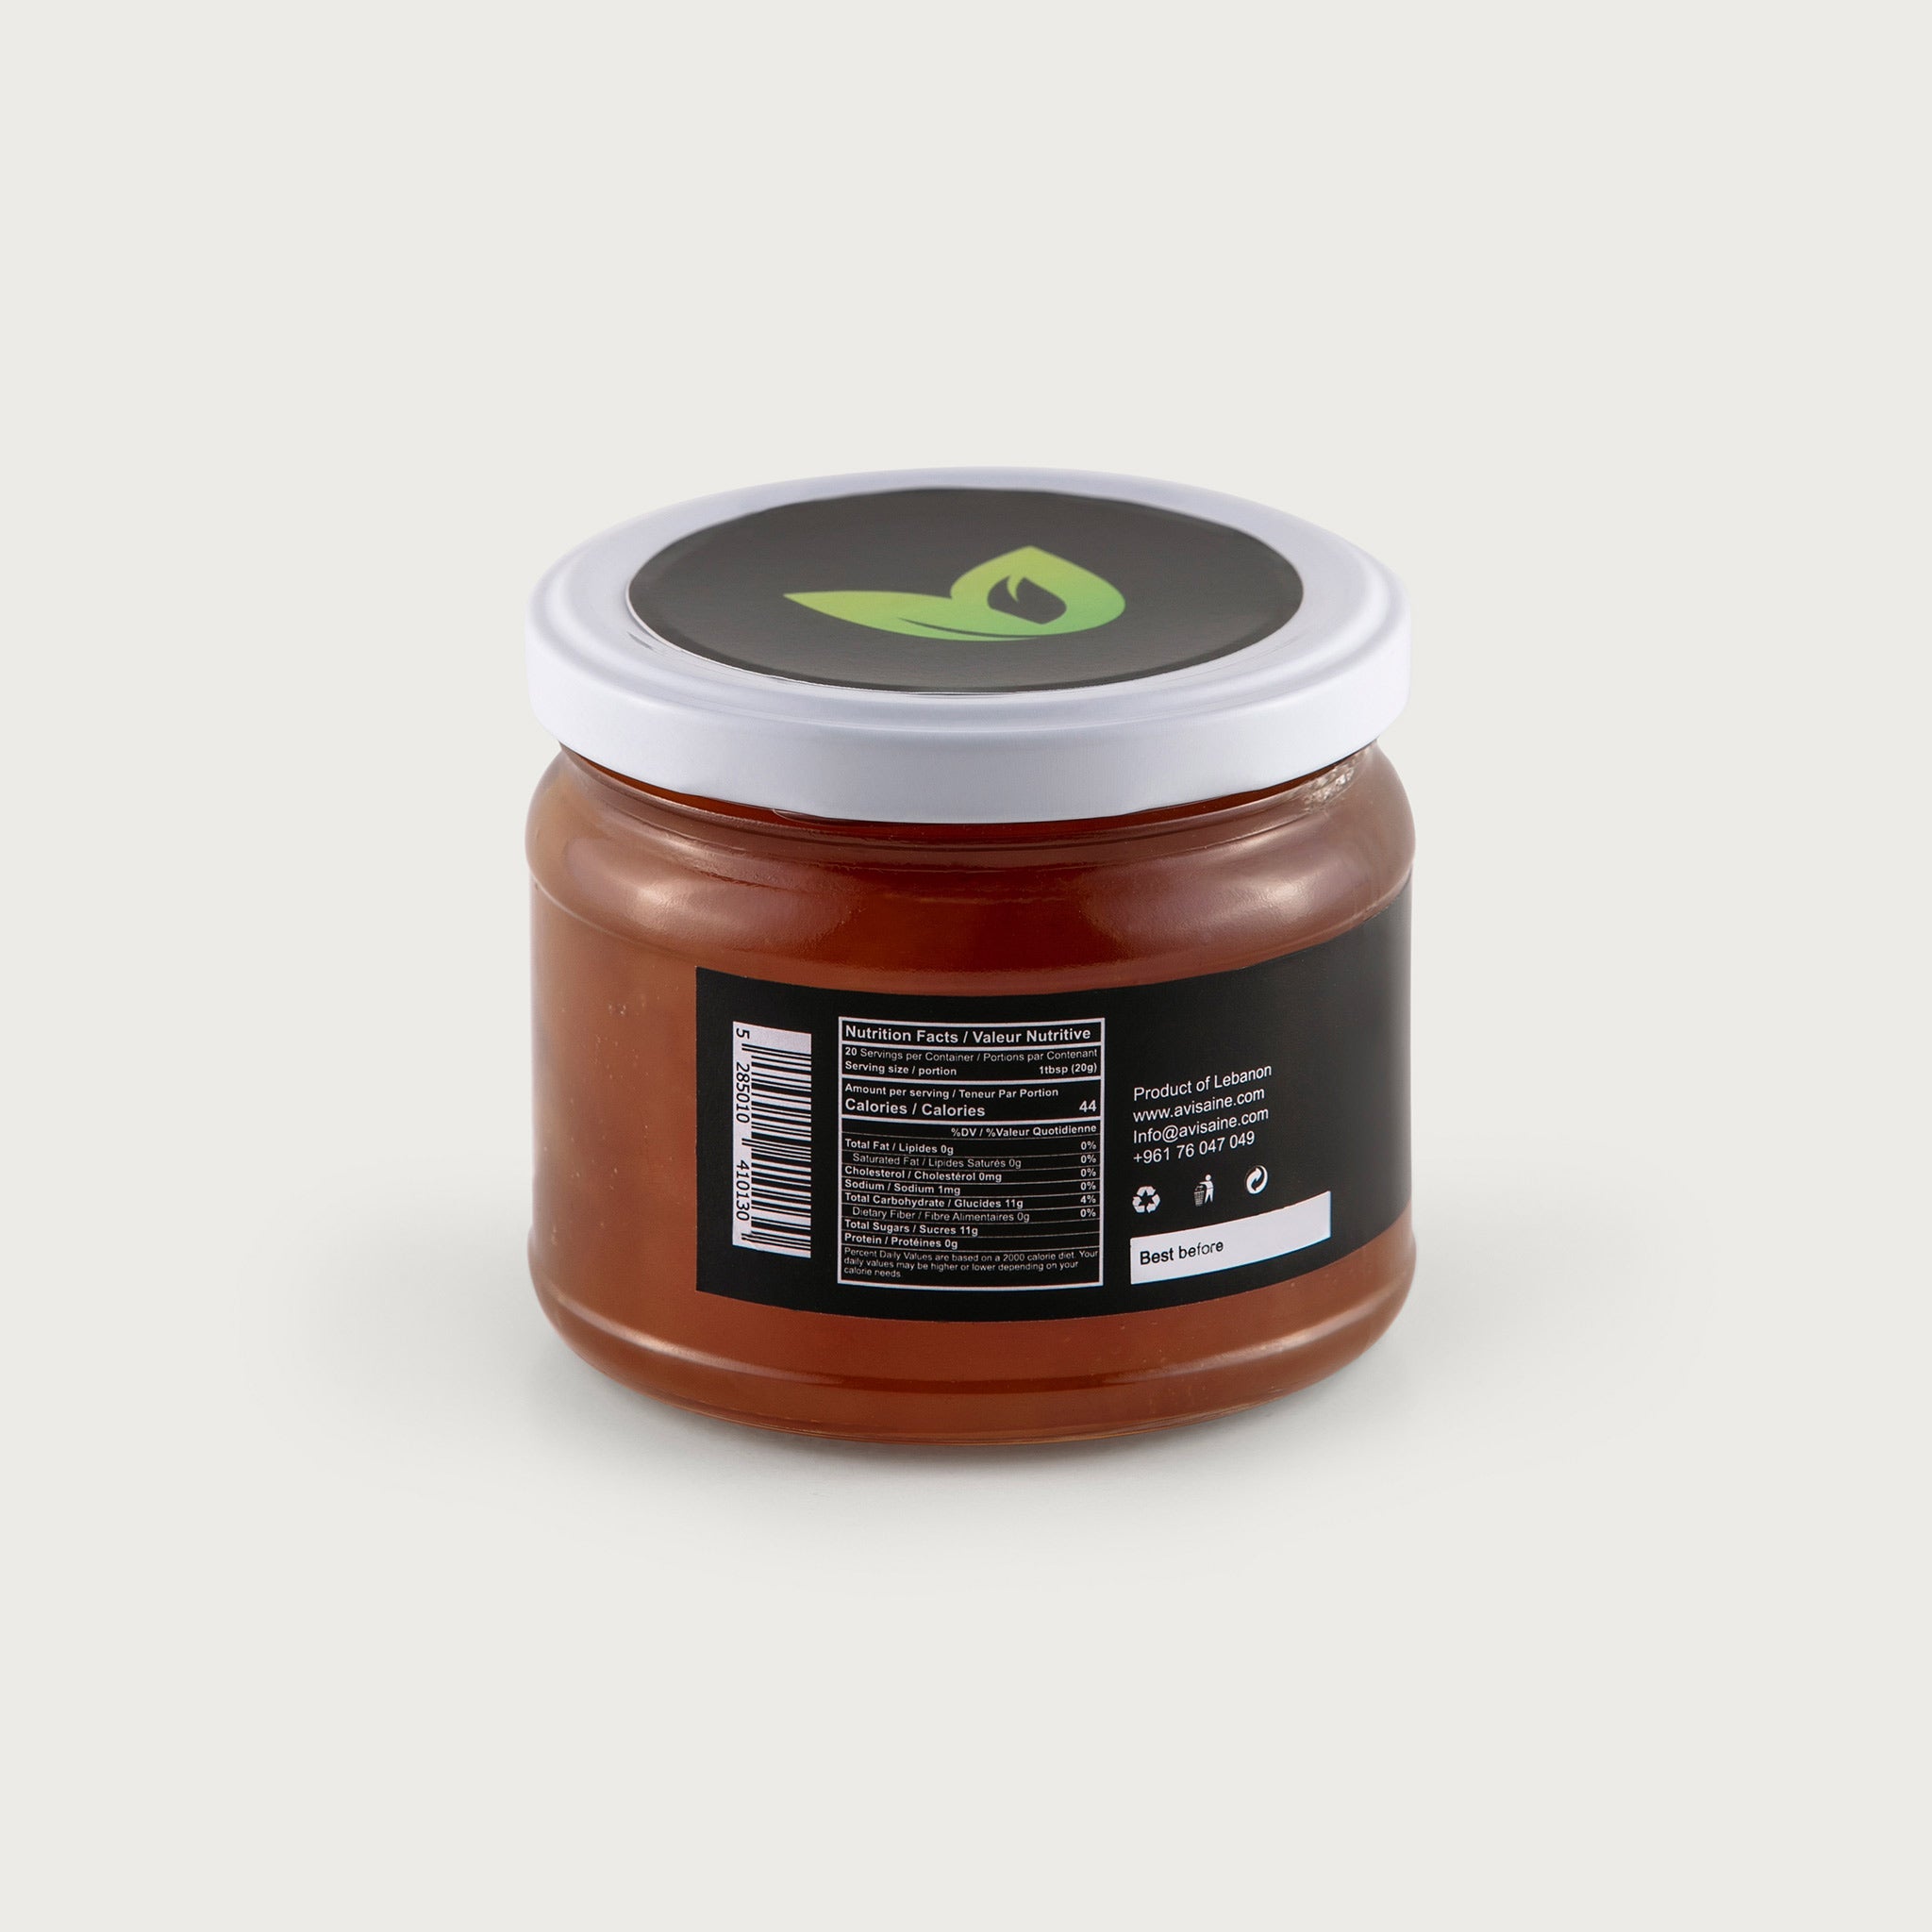 A clear 14 oz jar with a screw top lid shows the rich honey colored apple jam. The label is black with the AviSaine logo, and the lid is white.